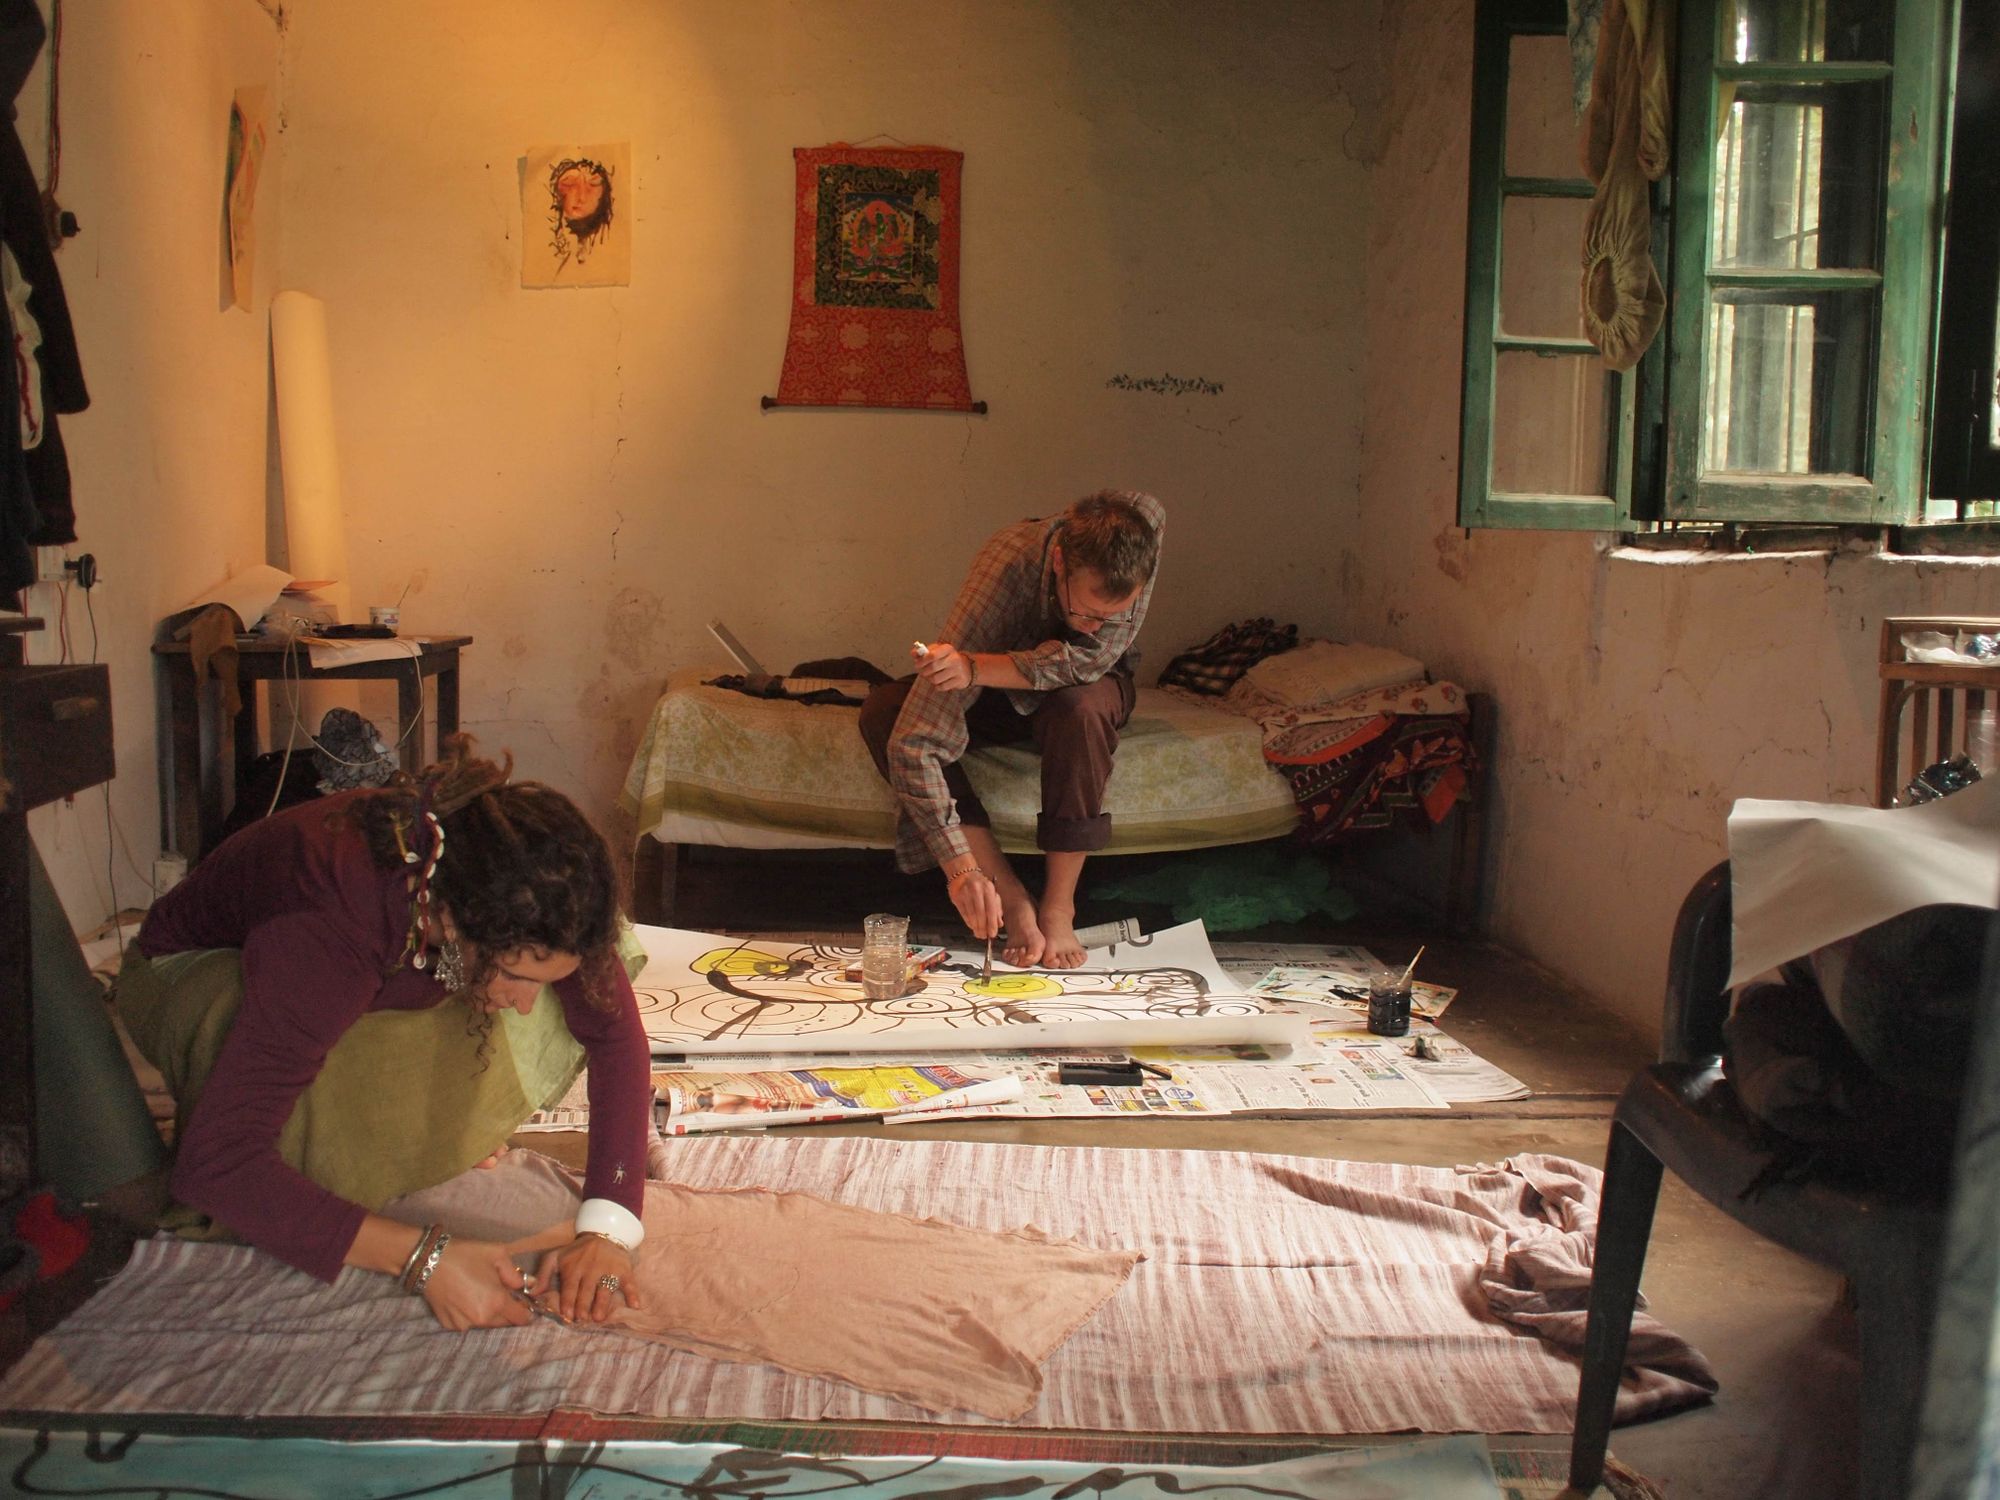 A woman wearing a raspberry shirt and green skirt squats on the floor, cutting out fabric for a dress. In the background a man sits on a small bed painting. There is a green trimmed window open to the right and a red bordered thangka on the wall behind. 